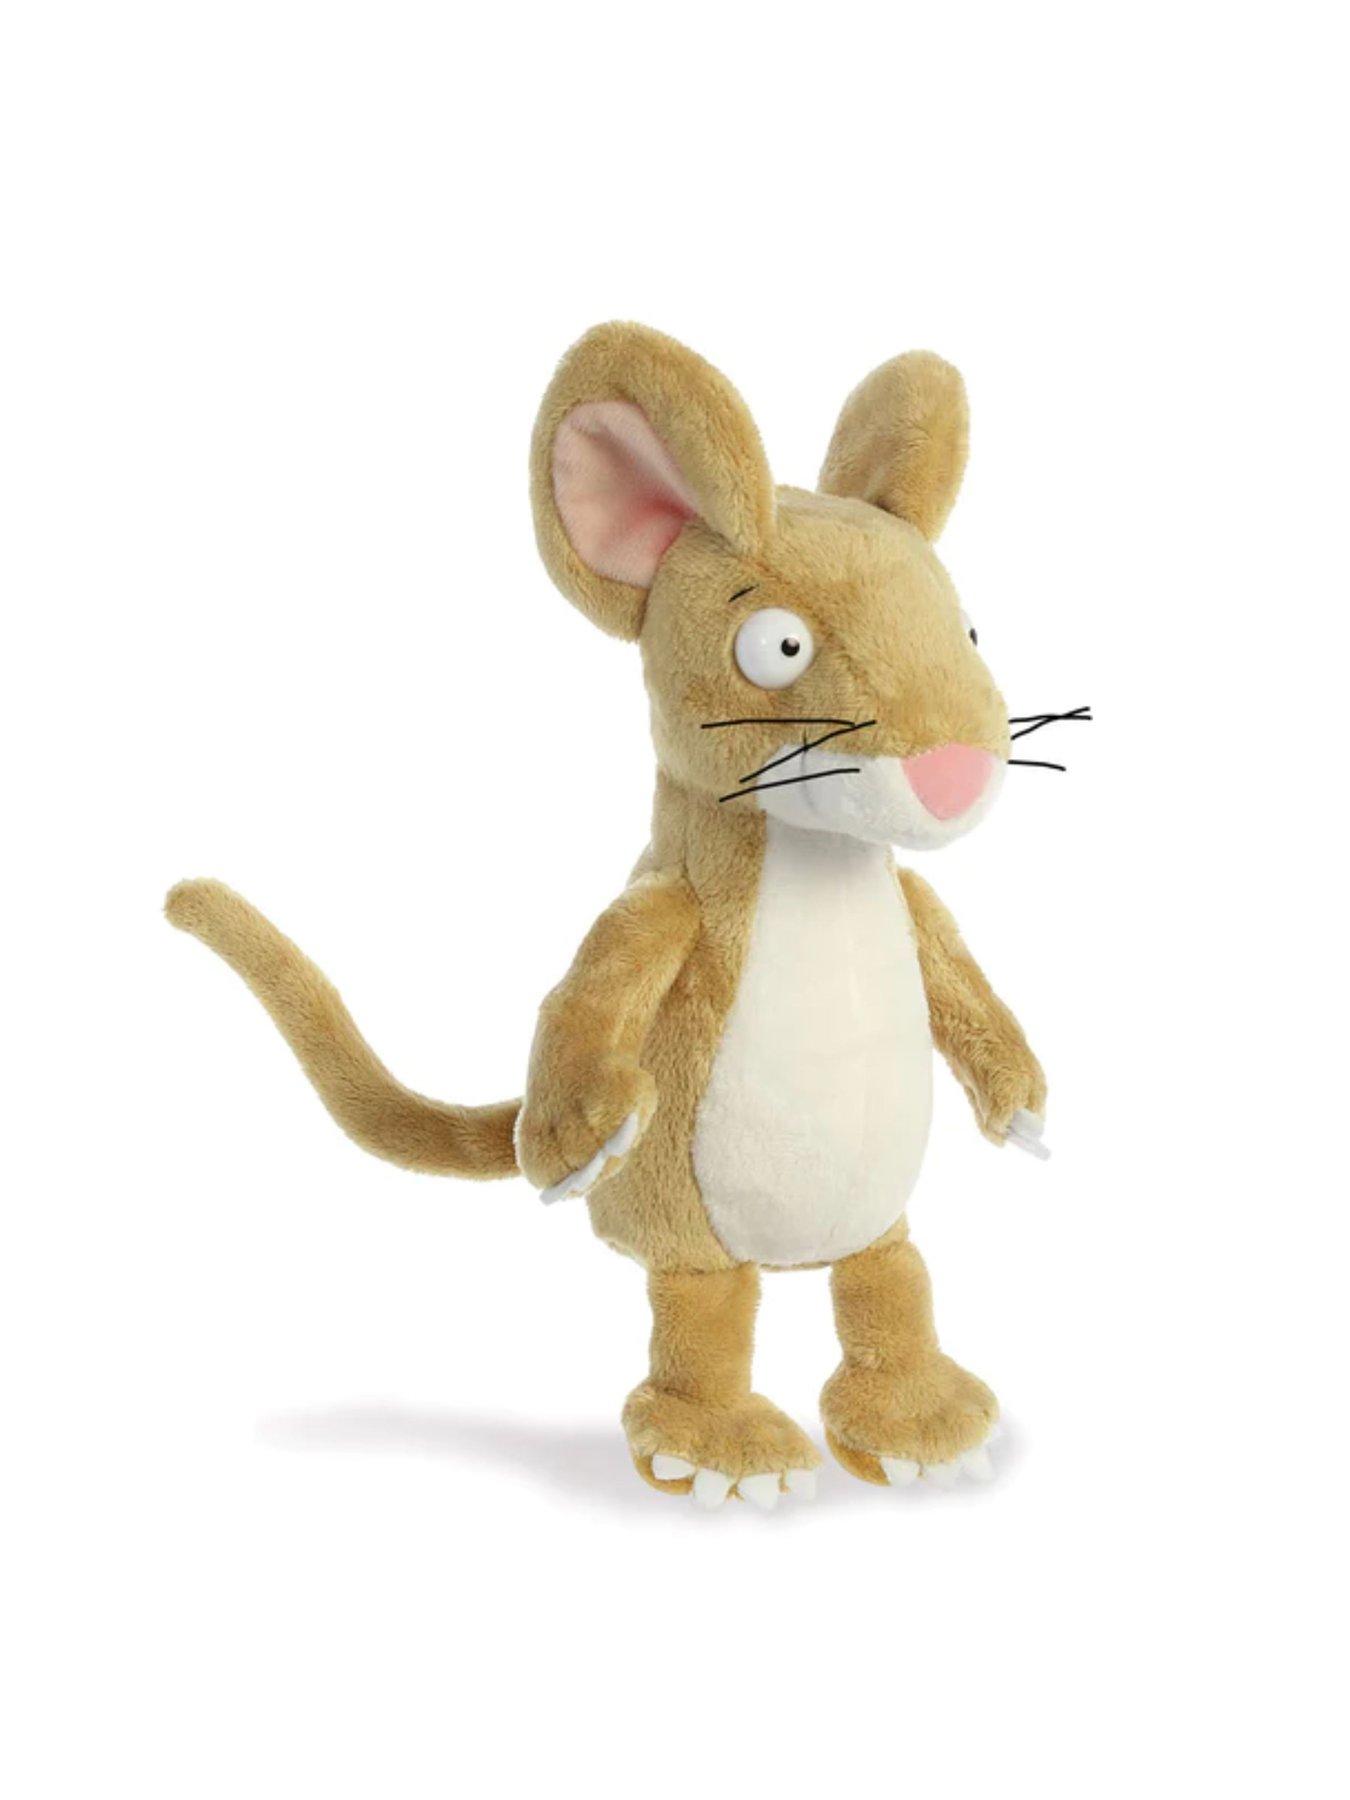 Race Clicker Royal Lion Plushy IS HERE 100% PET and HELICOPTER CAR 